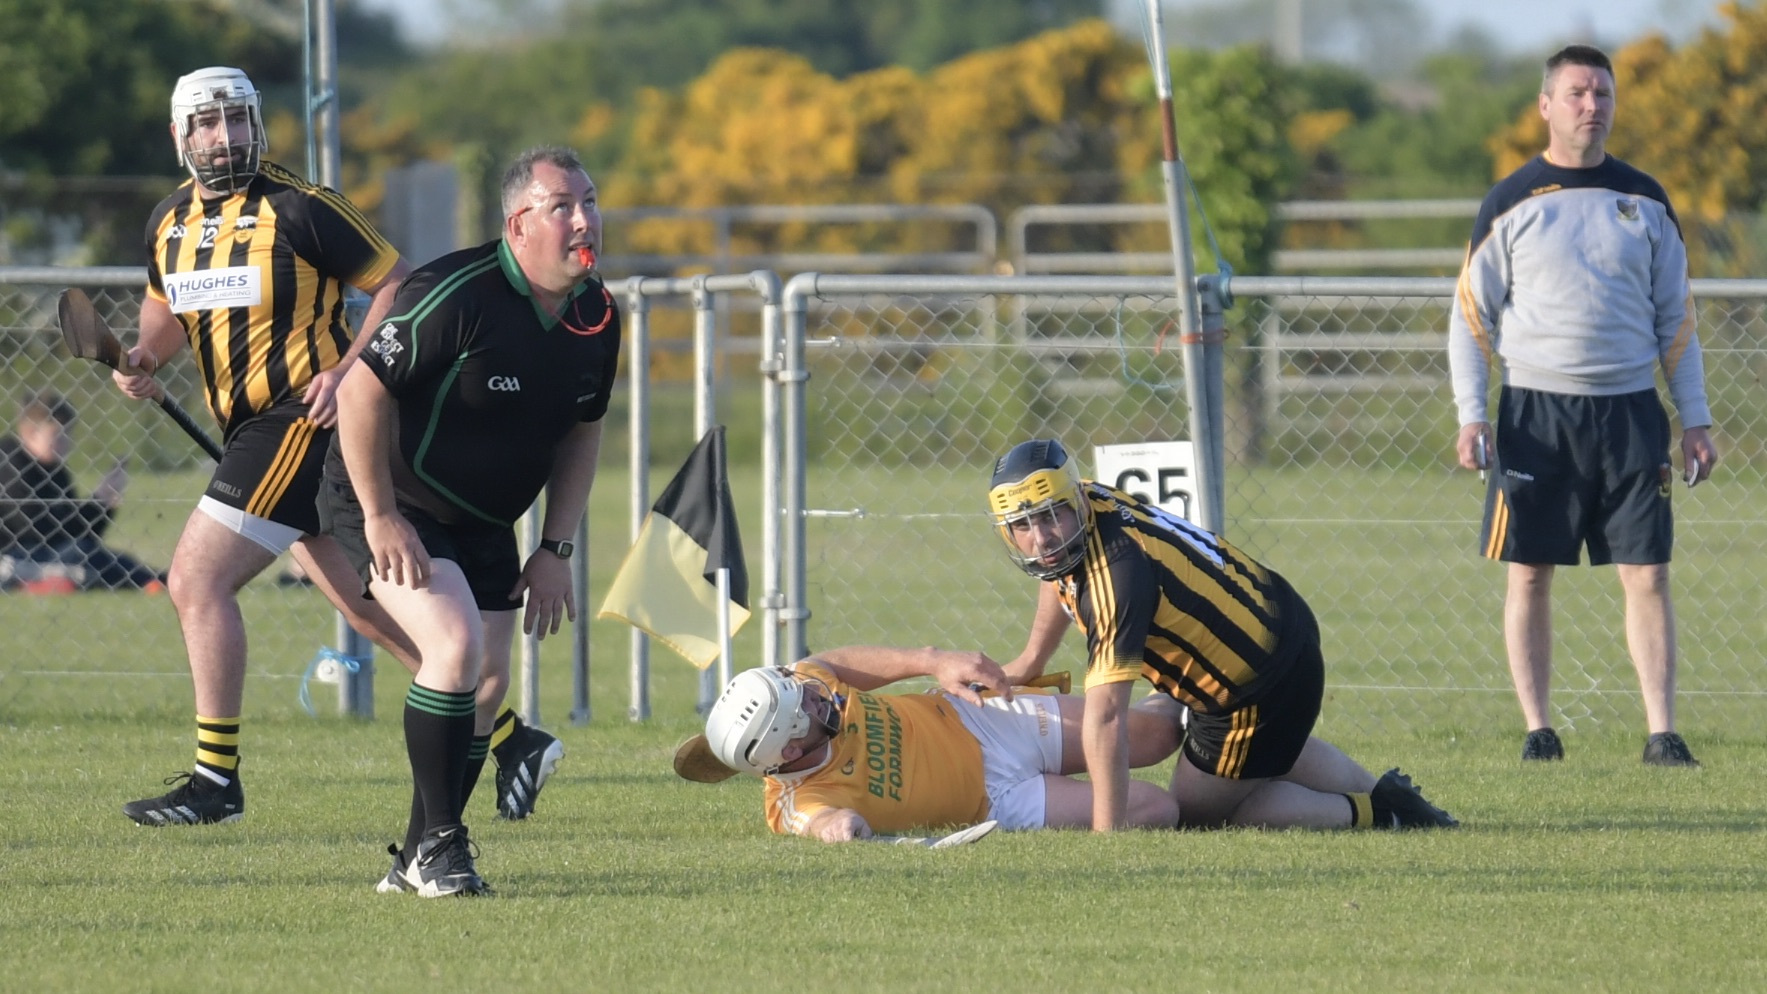 Ballycran 2nds find solid form to cope with Clonduff